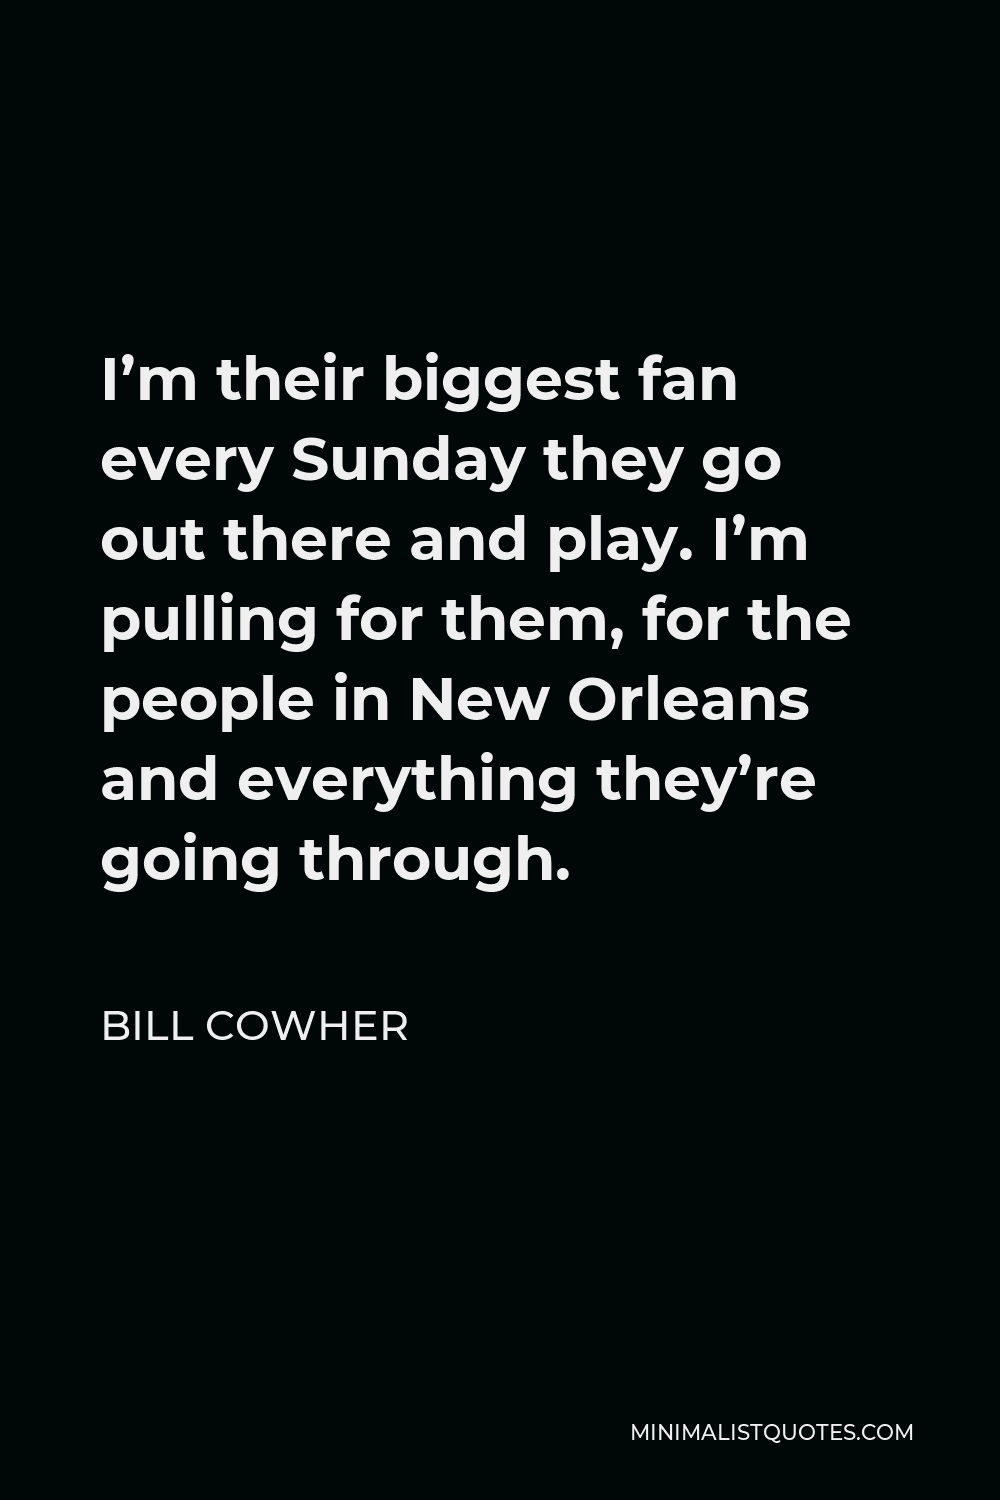 Bill Cowher Quote - I’m their biggest fan every Sunday they go out there and play. I’m pulling for them, for the people in New Orleans and everything they’re going through.